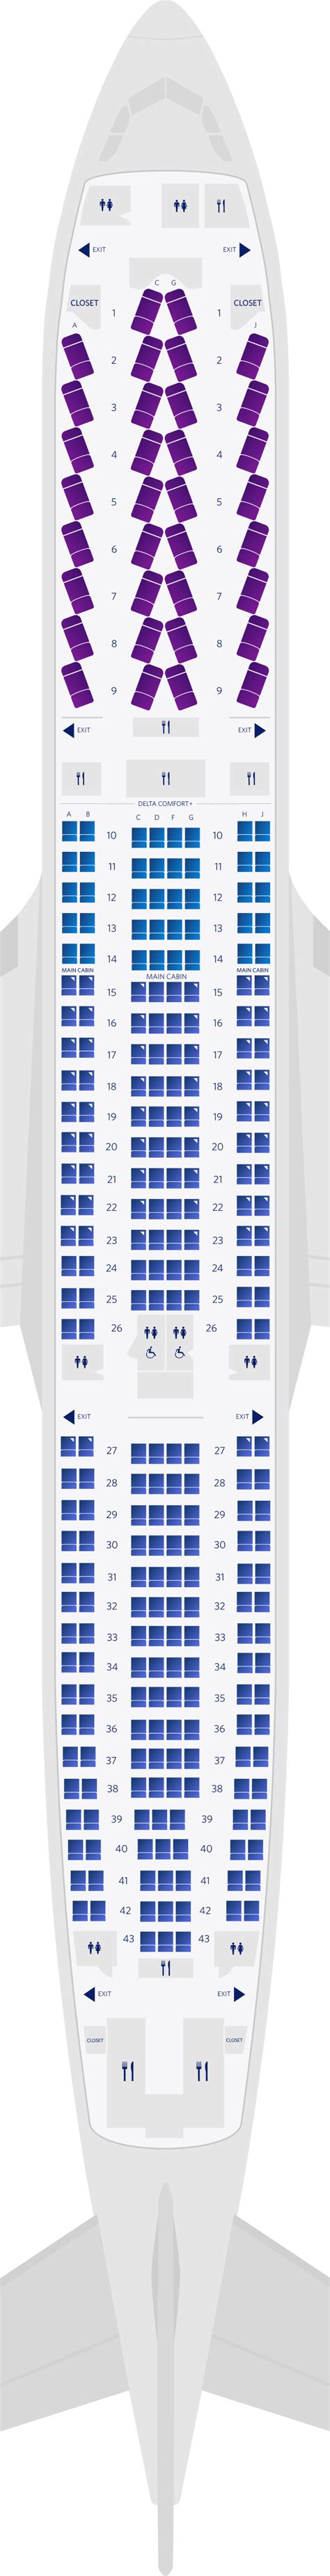 Delta Airbus A Seat Map Updated Find The Best Seat Seatmaps Lupon Gov Ph